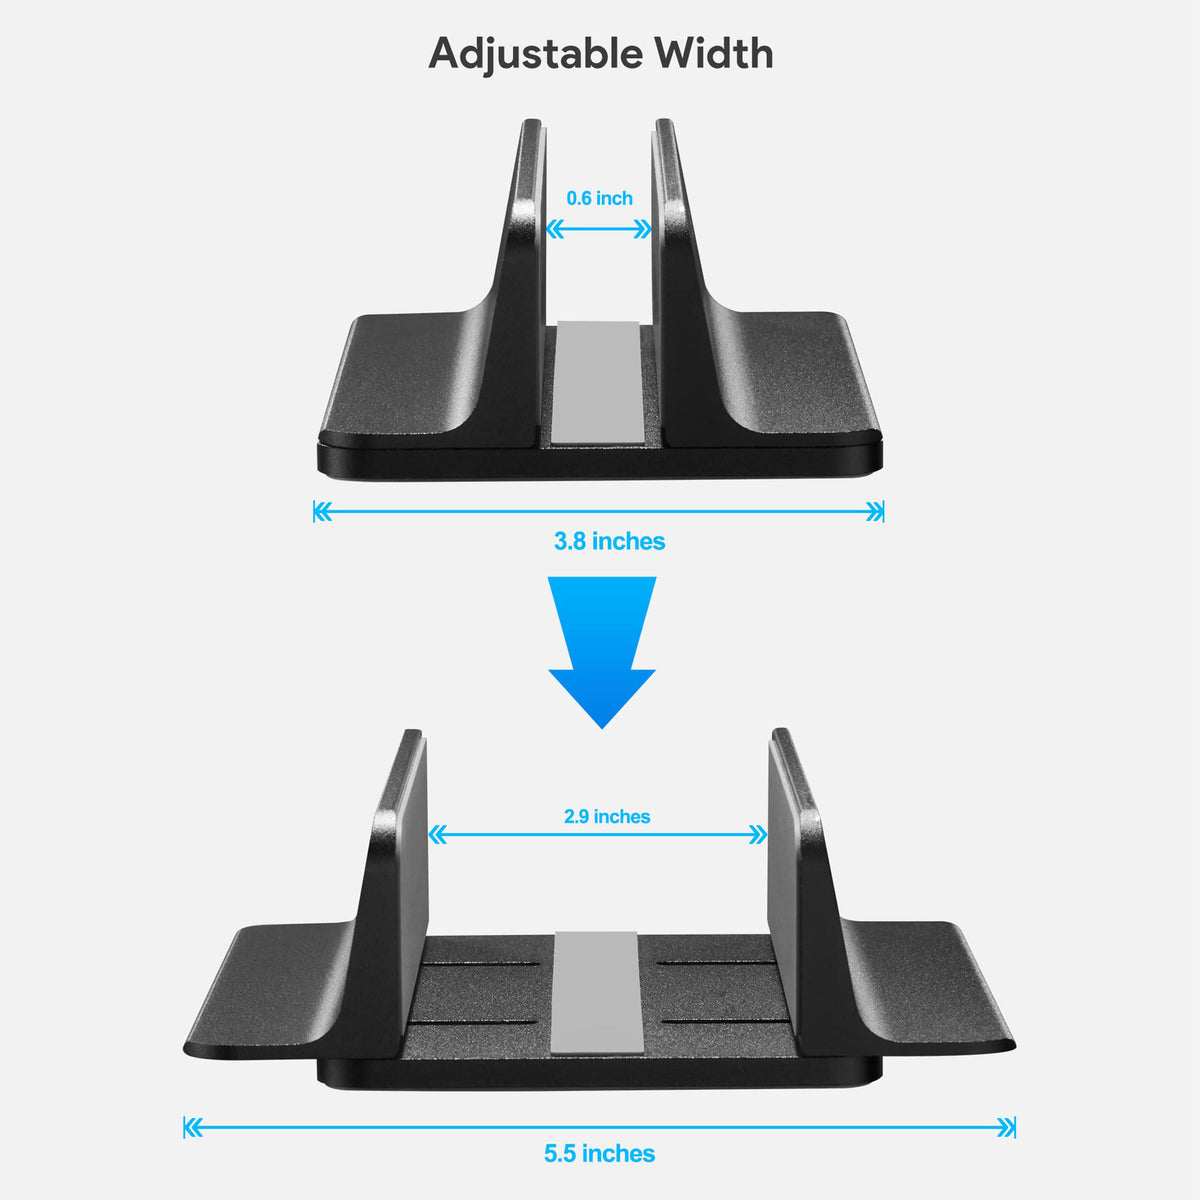 JARLINK Vertical Laptop Stand, Adjustable Laptop Holder Desktop Stand with Adjustable Dock Size (up to 17.3 inches) Compatible with All MacBook/Surface/Dell/Gaming Laptops